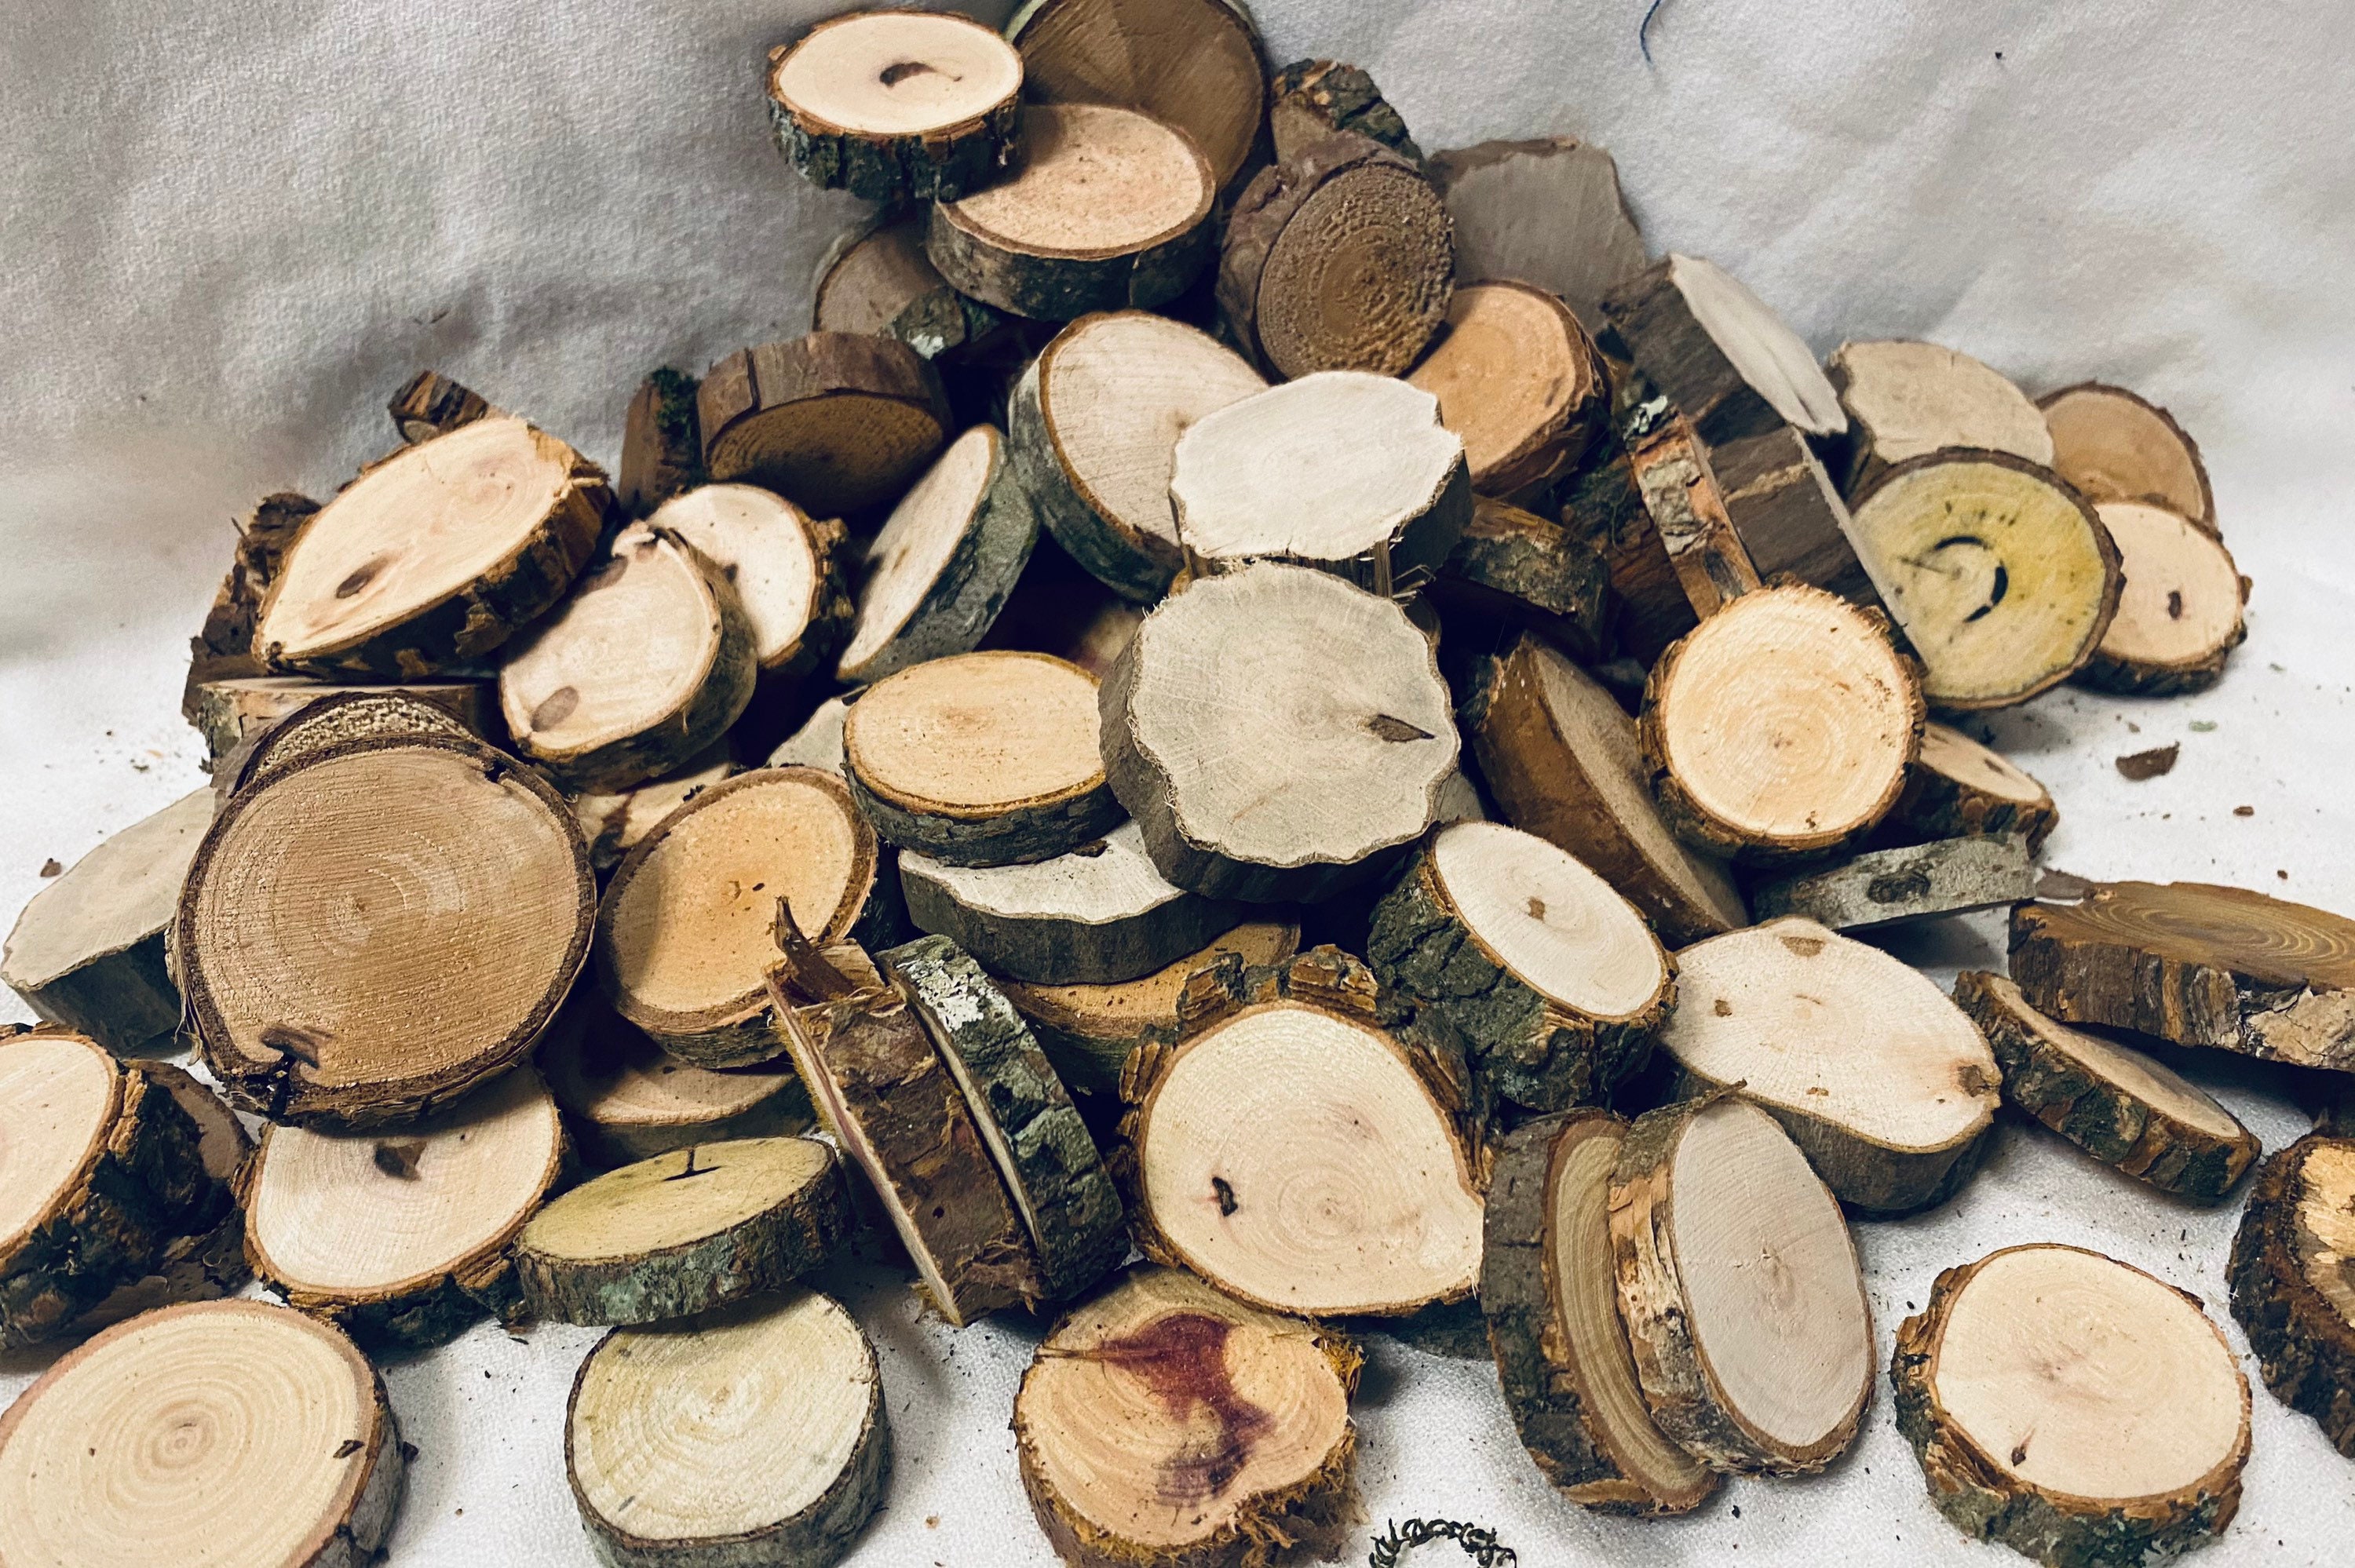 Tree Slices 12 Ct, Mini Wooden Circles 1.25 2.25 In, Small Wood Slices,  Bulk Wood Slices, Rustic Wooden Circles for Crafts 